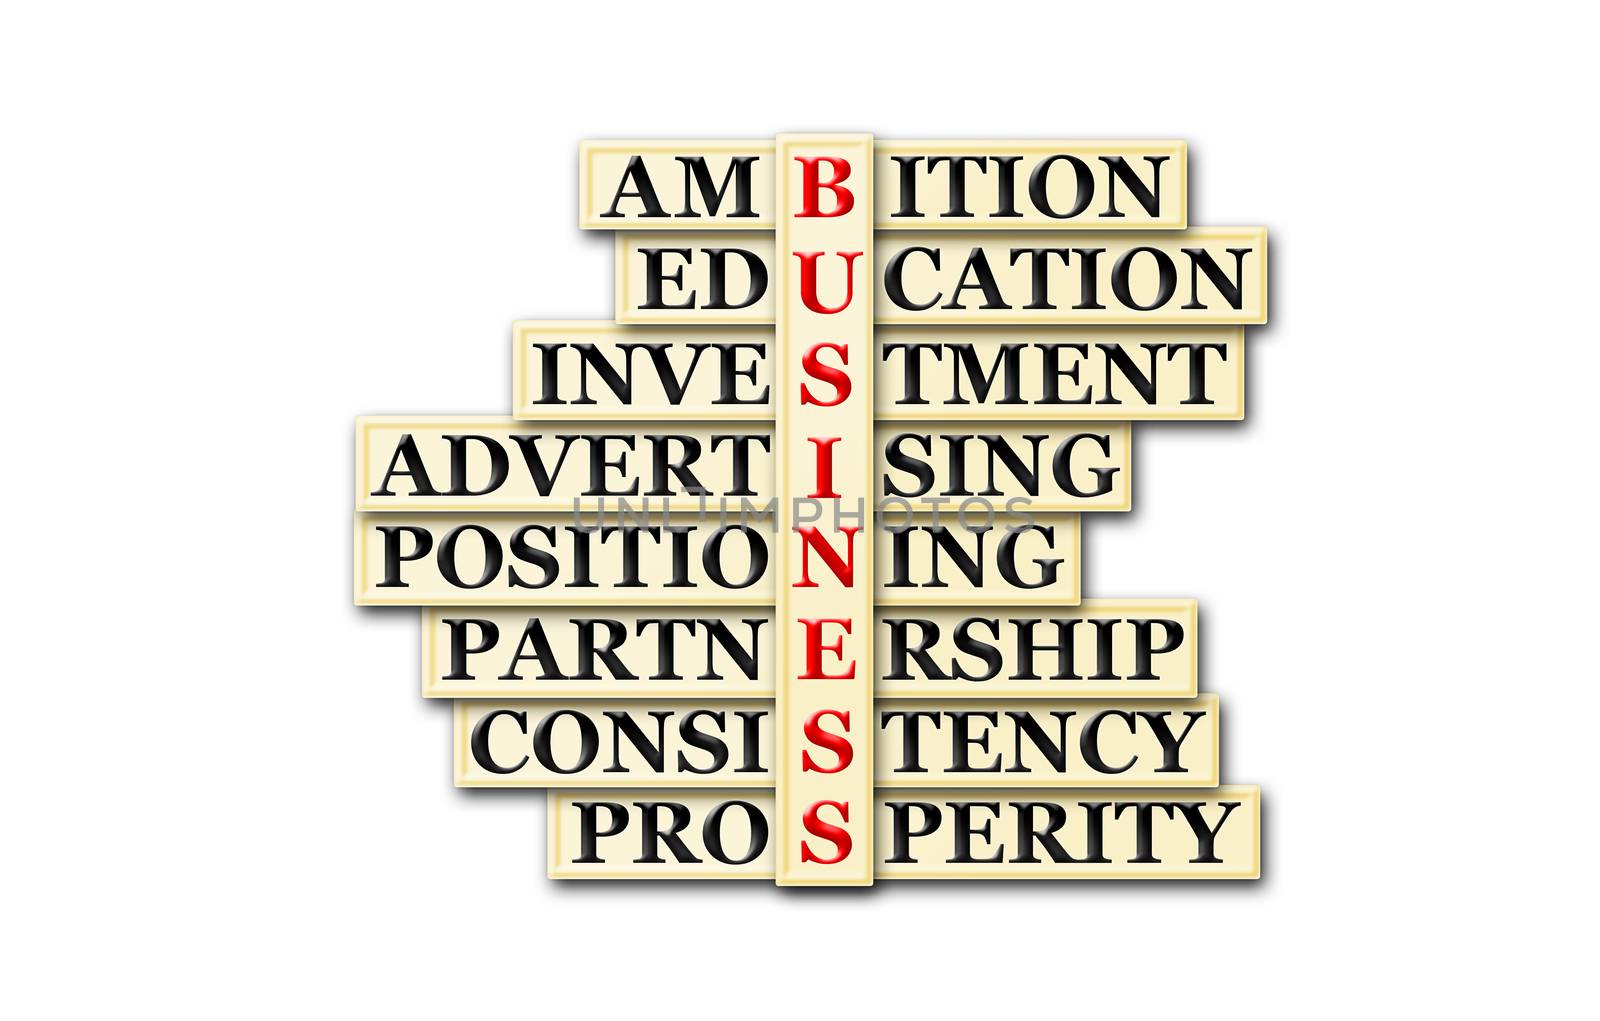 acronym concept of business and other releated words 